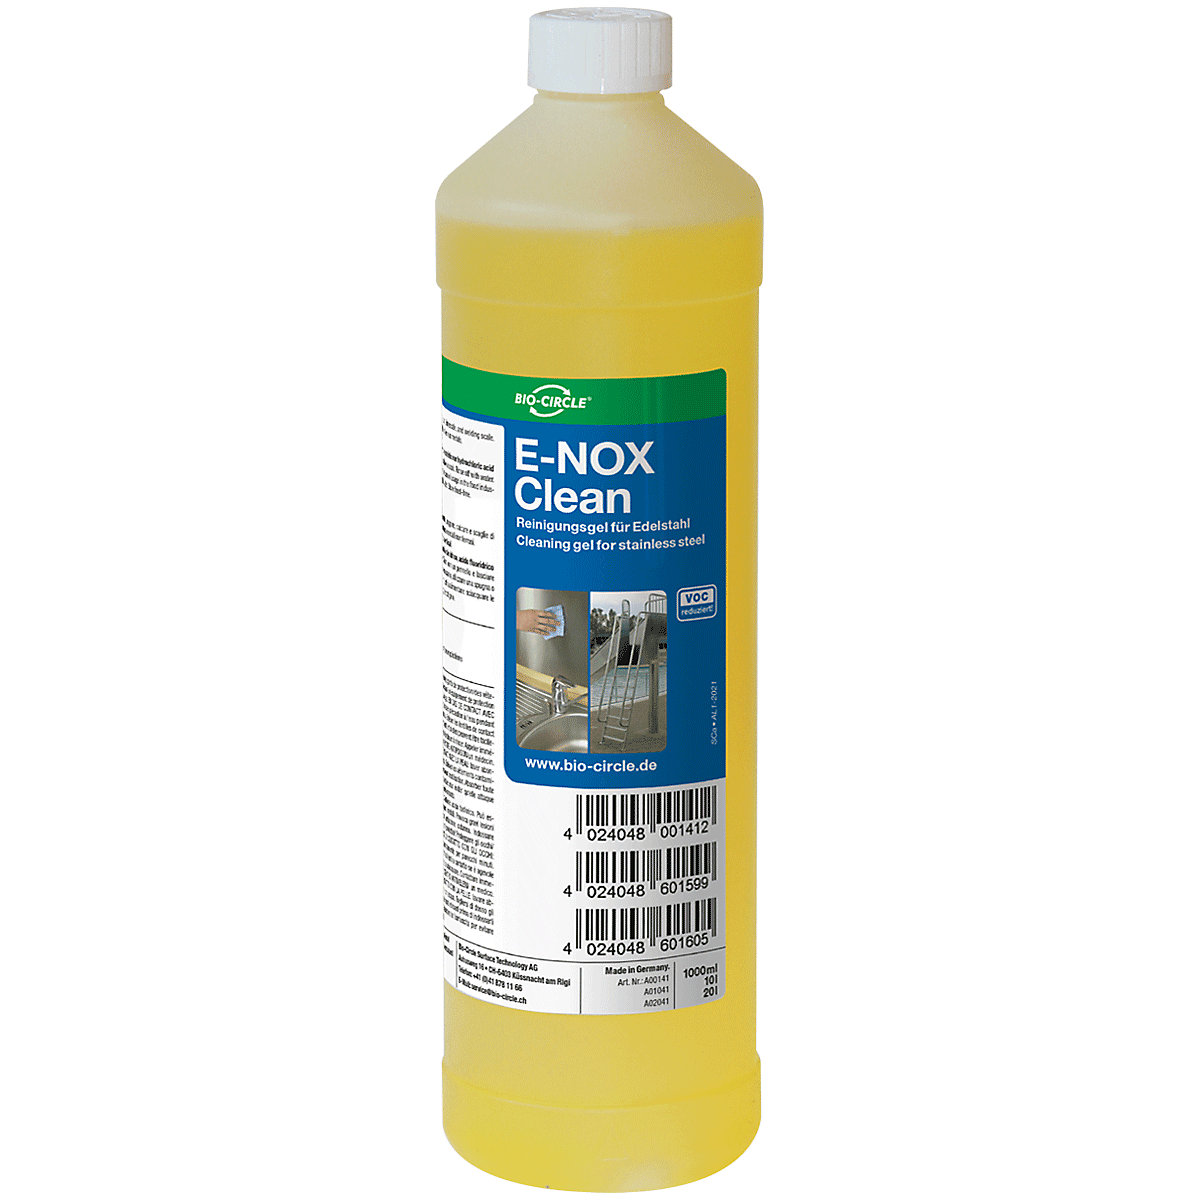 E-NOX Clean limescale and rust cleaner – Bio-Circle